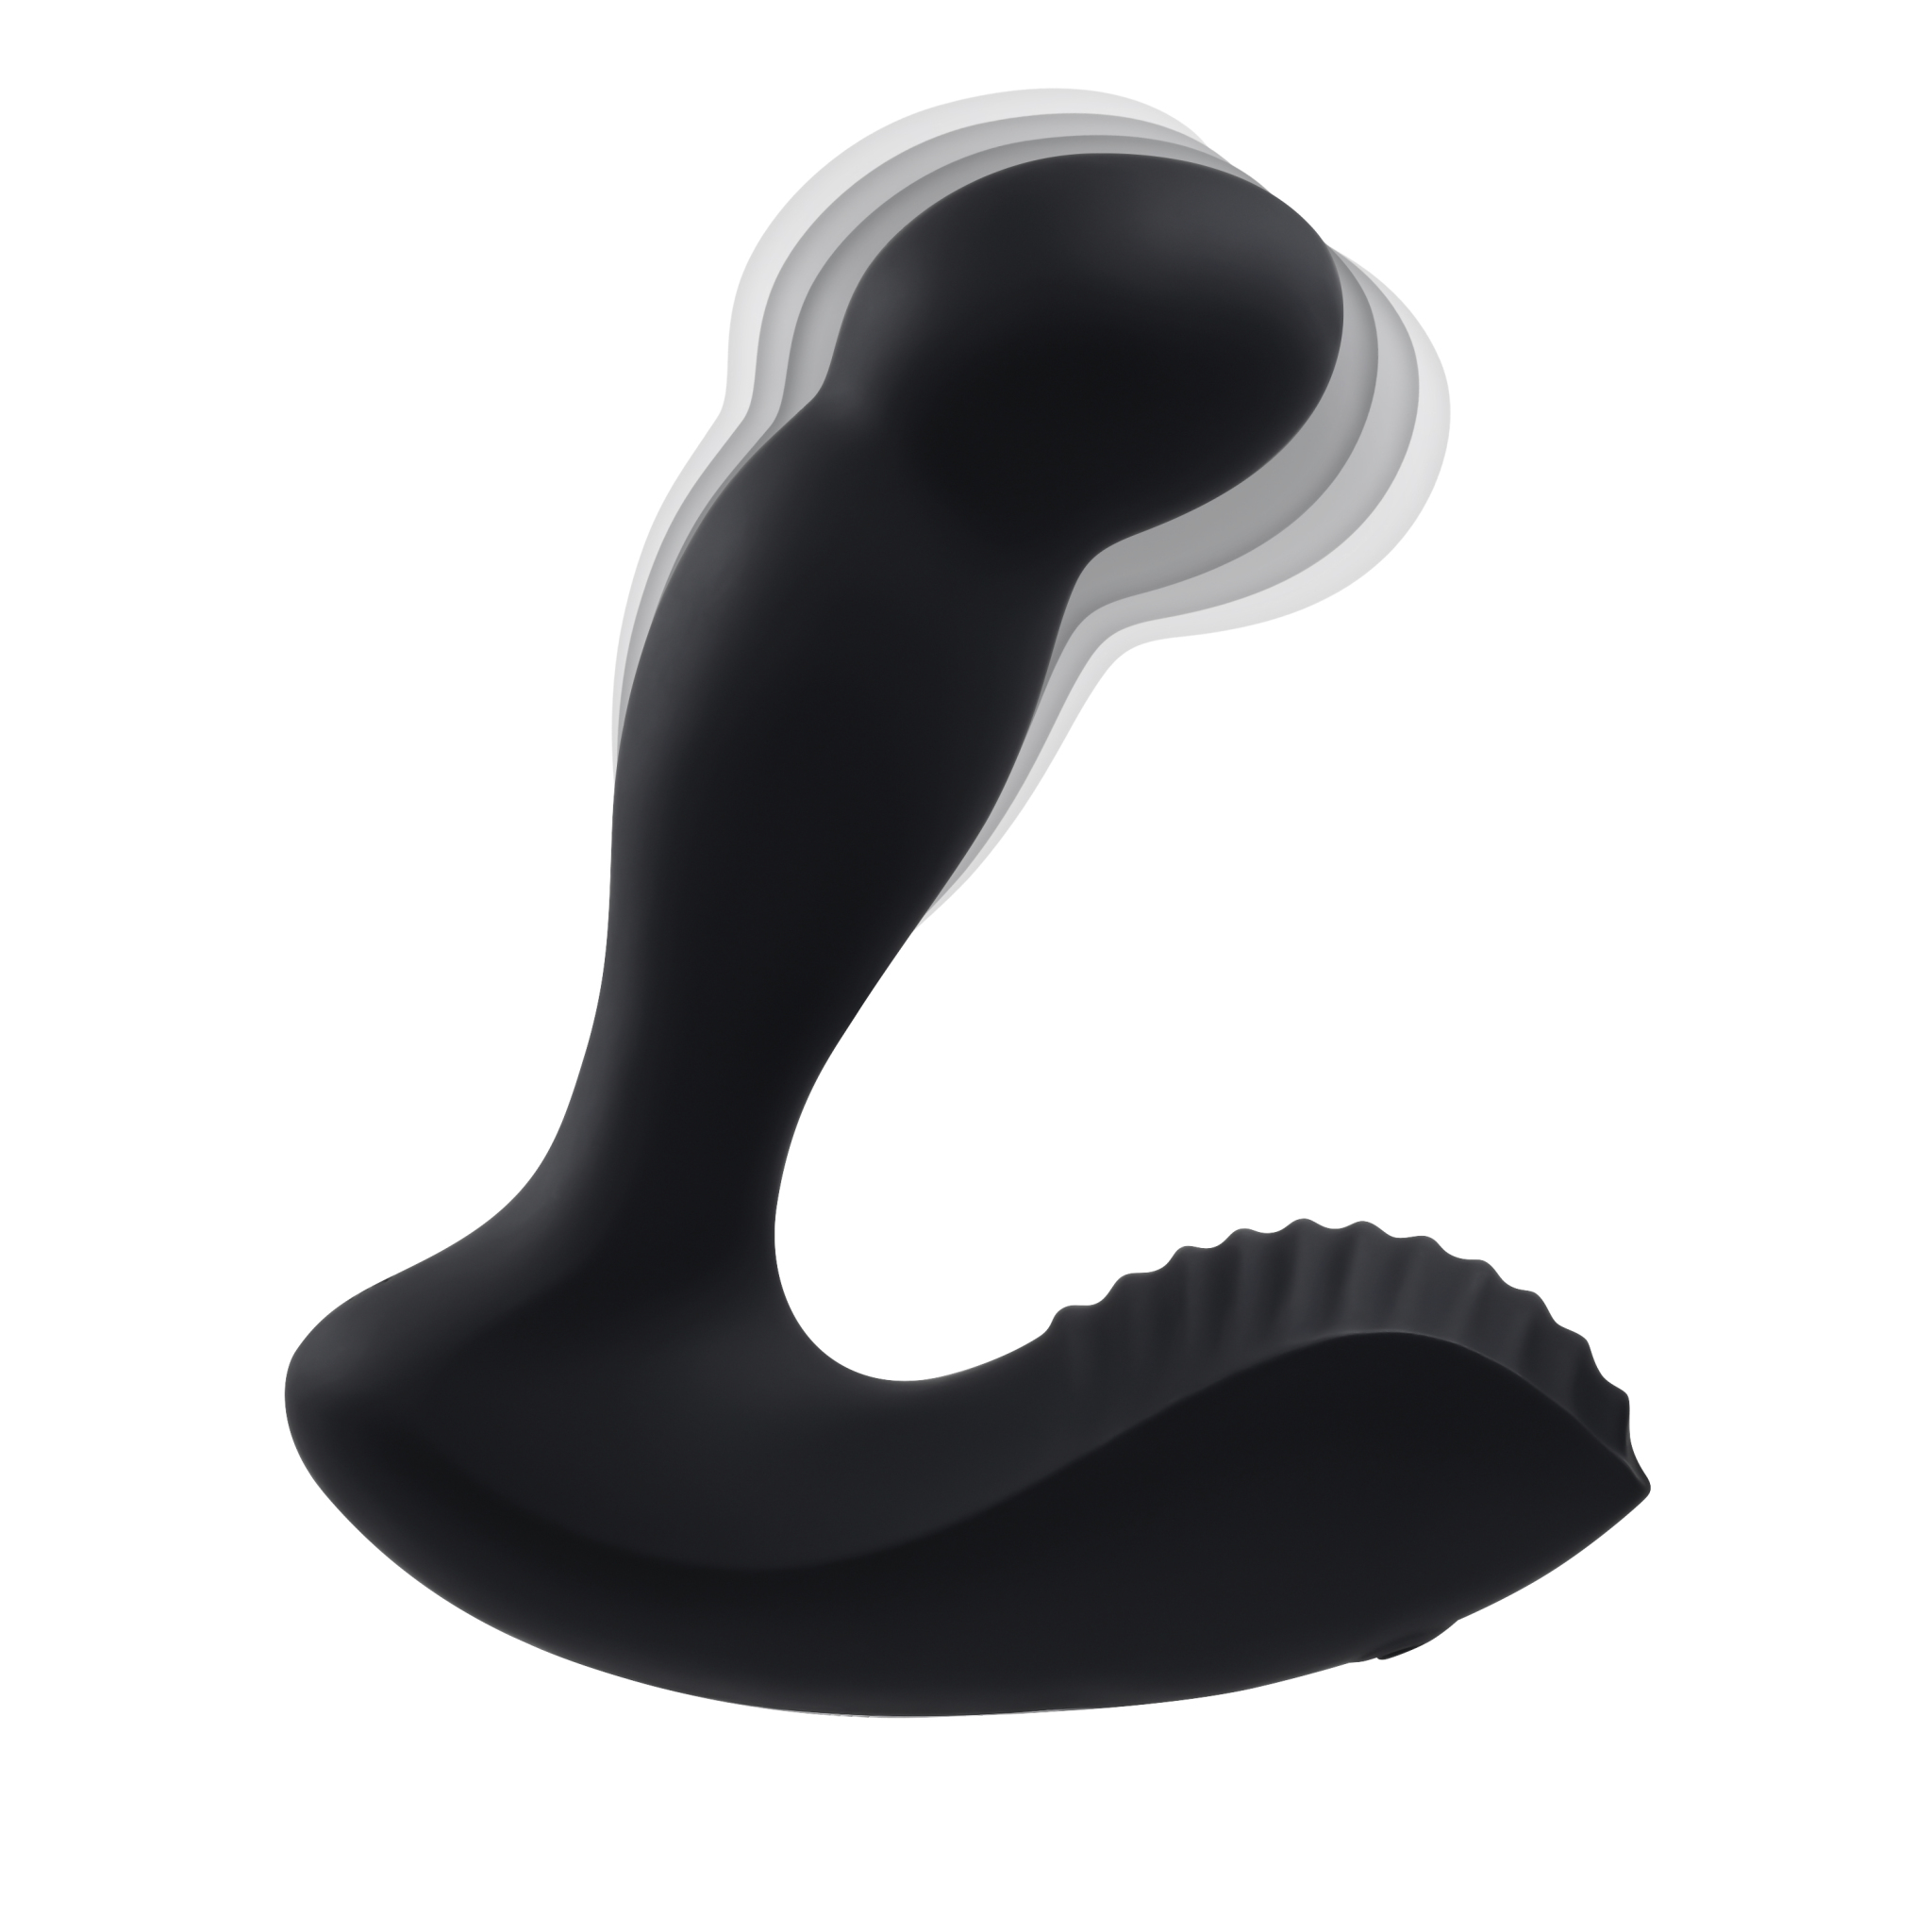 ADAM & EVE ADAMS COME HITHER PROSTATE MASSAGER - ENAEWF01052